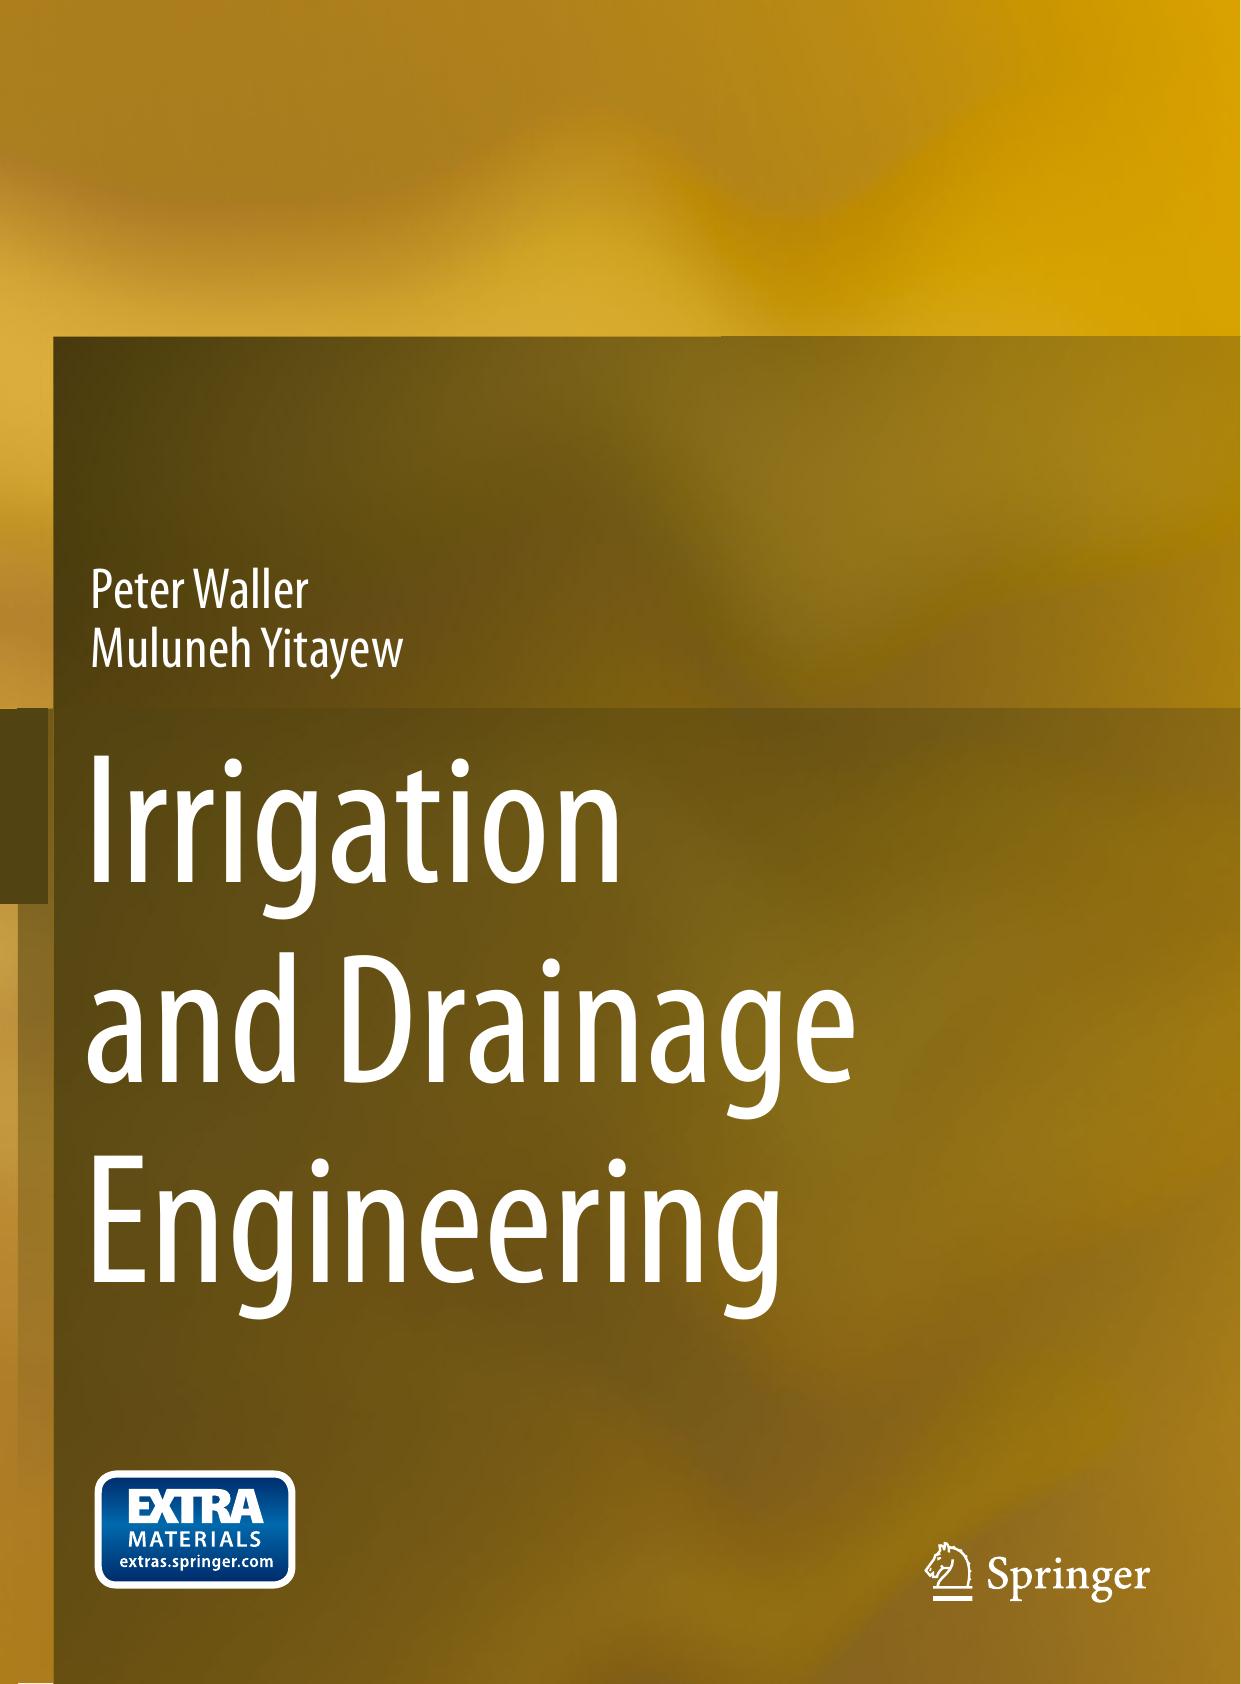 Irrigation and Drainage Engineering by Peter Waller & Muluneh Yitayew